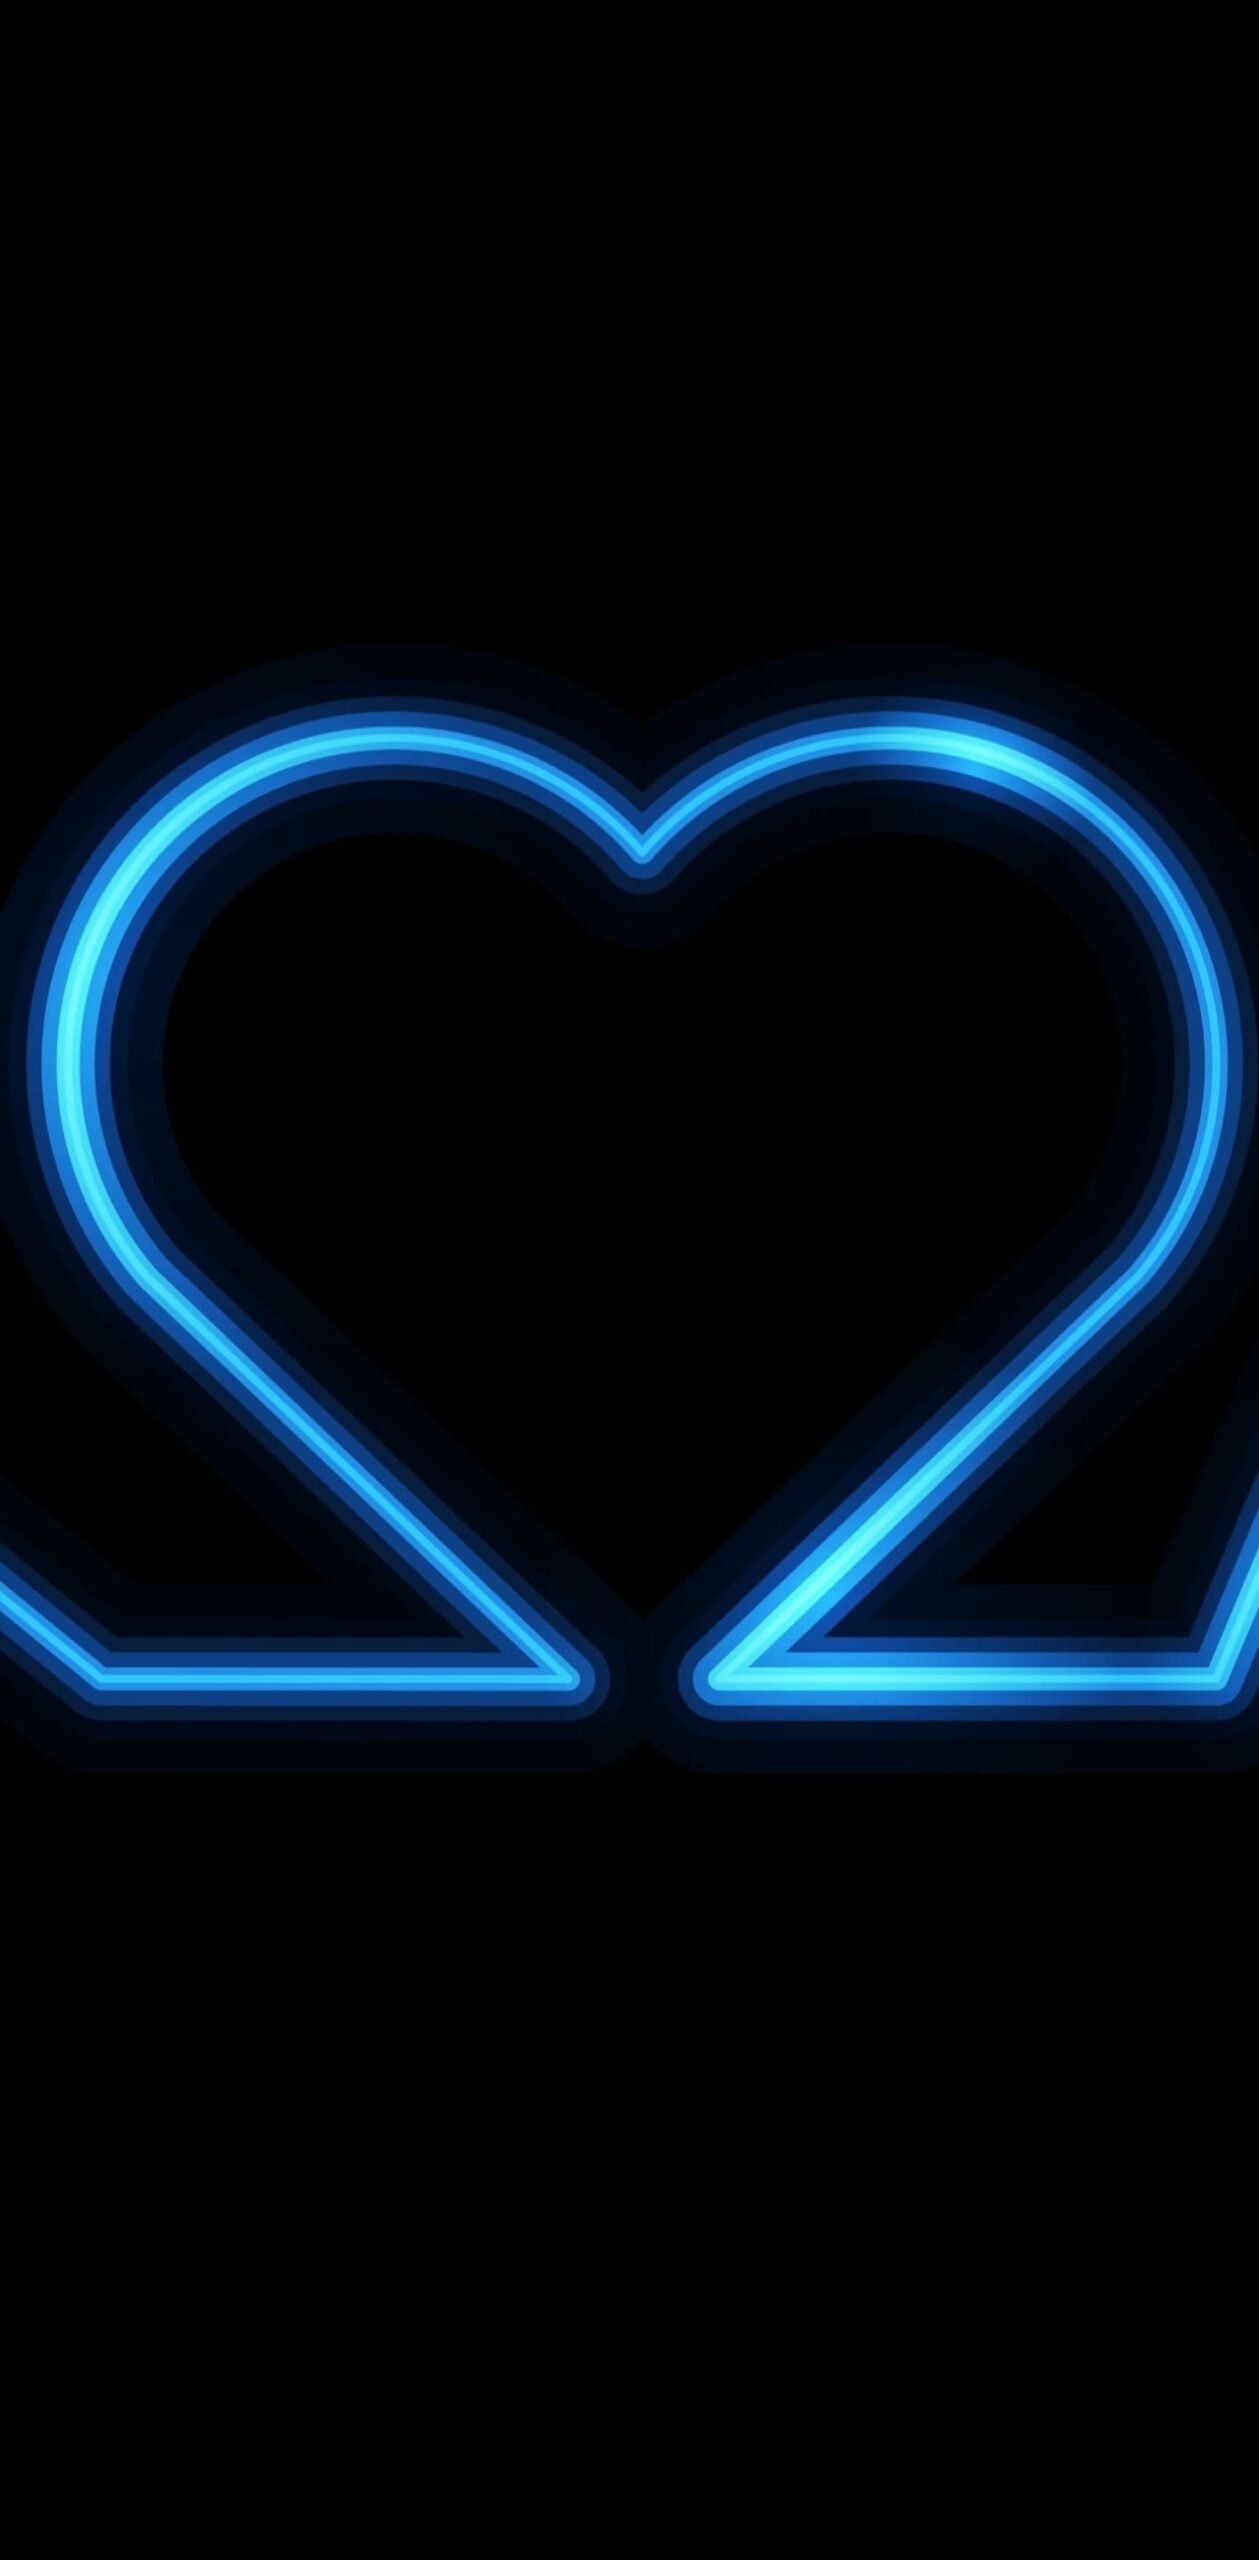 HD wallpaper In Love heartbeat line illustration alive blue illuminatedvalentines day images scaled